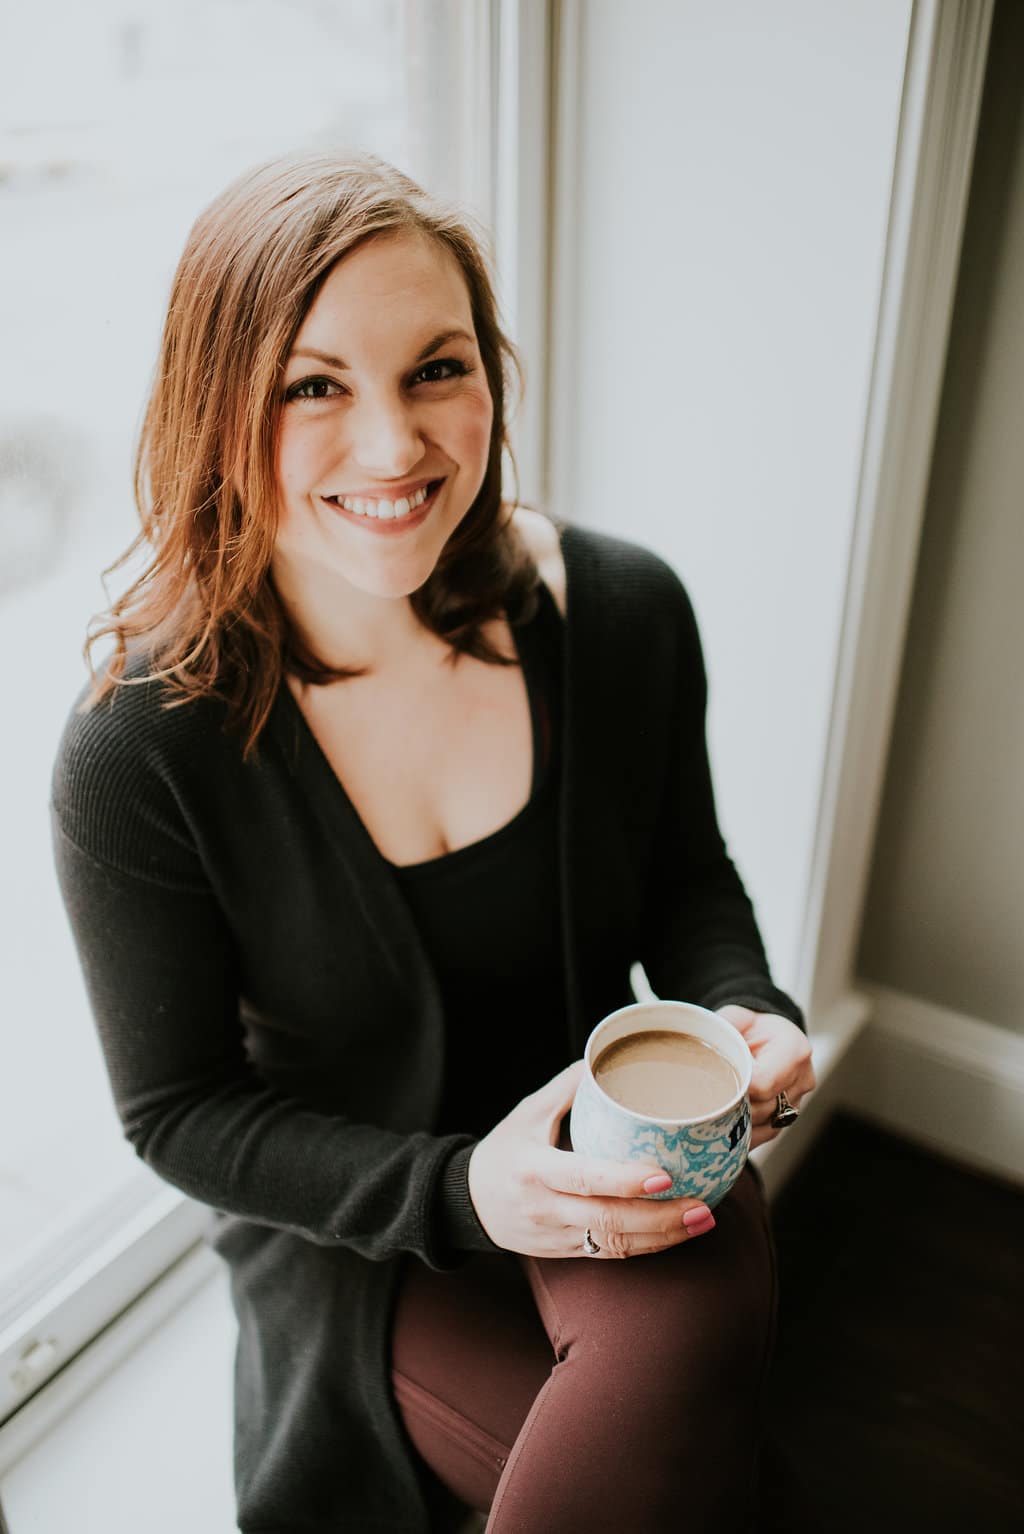 Shot of woman sitting in a windowsill smiling with a cup of coffee